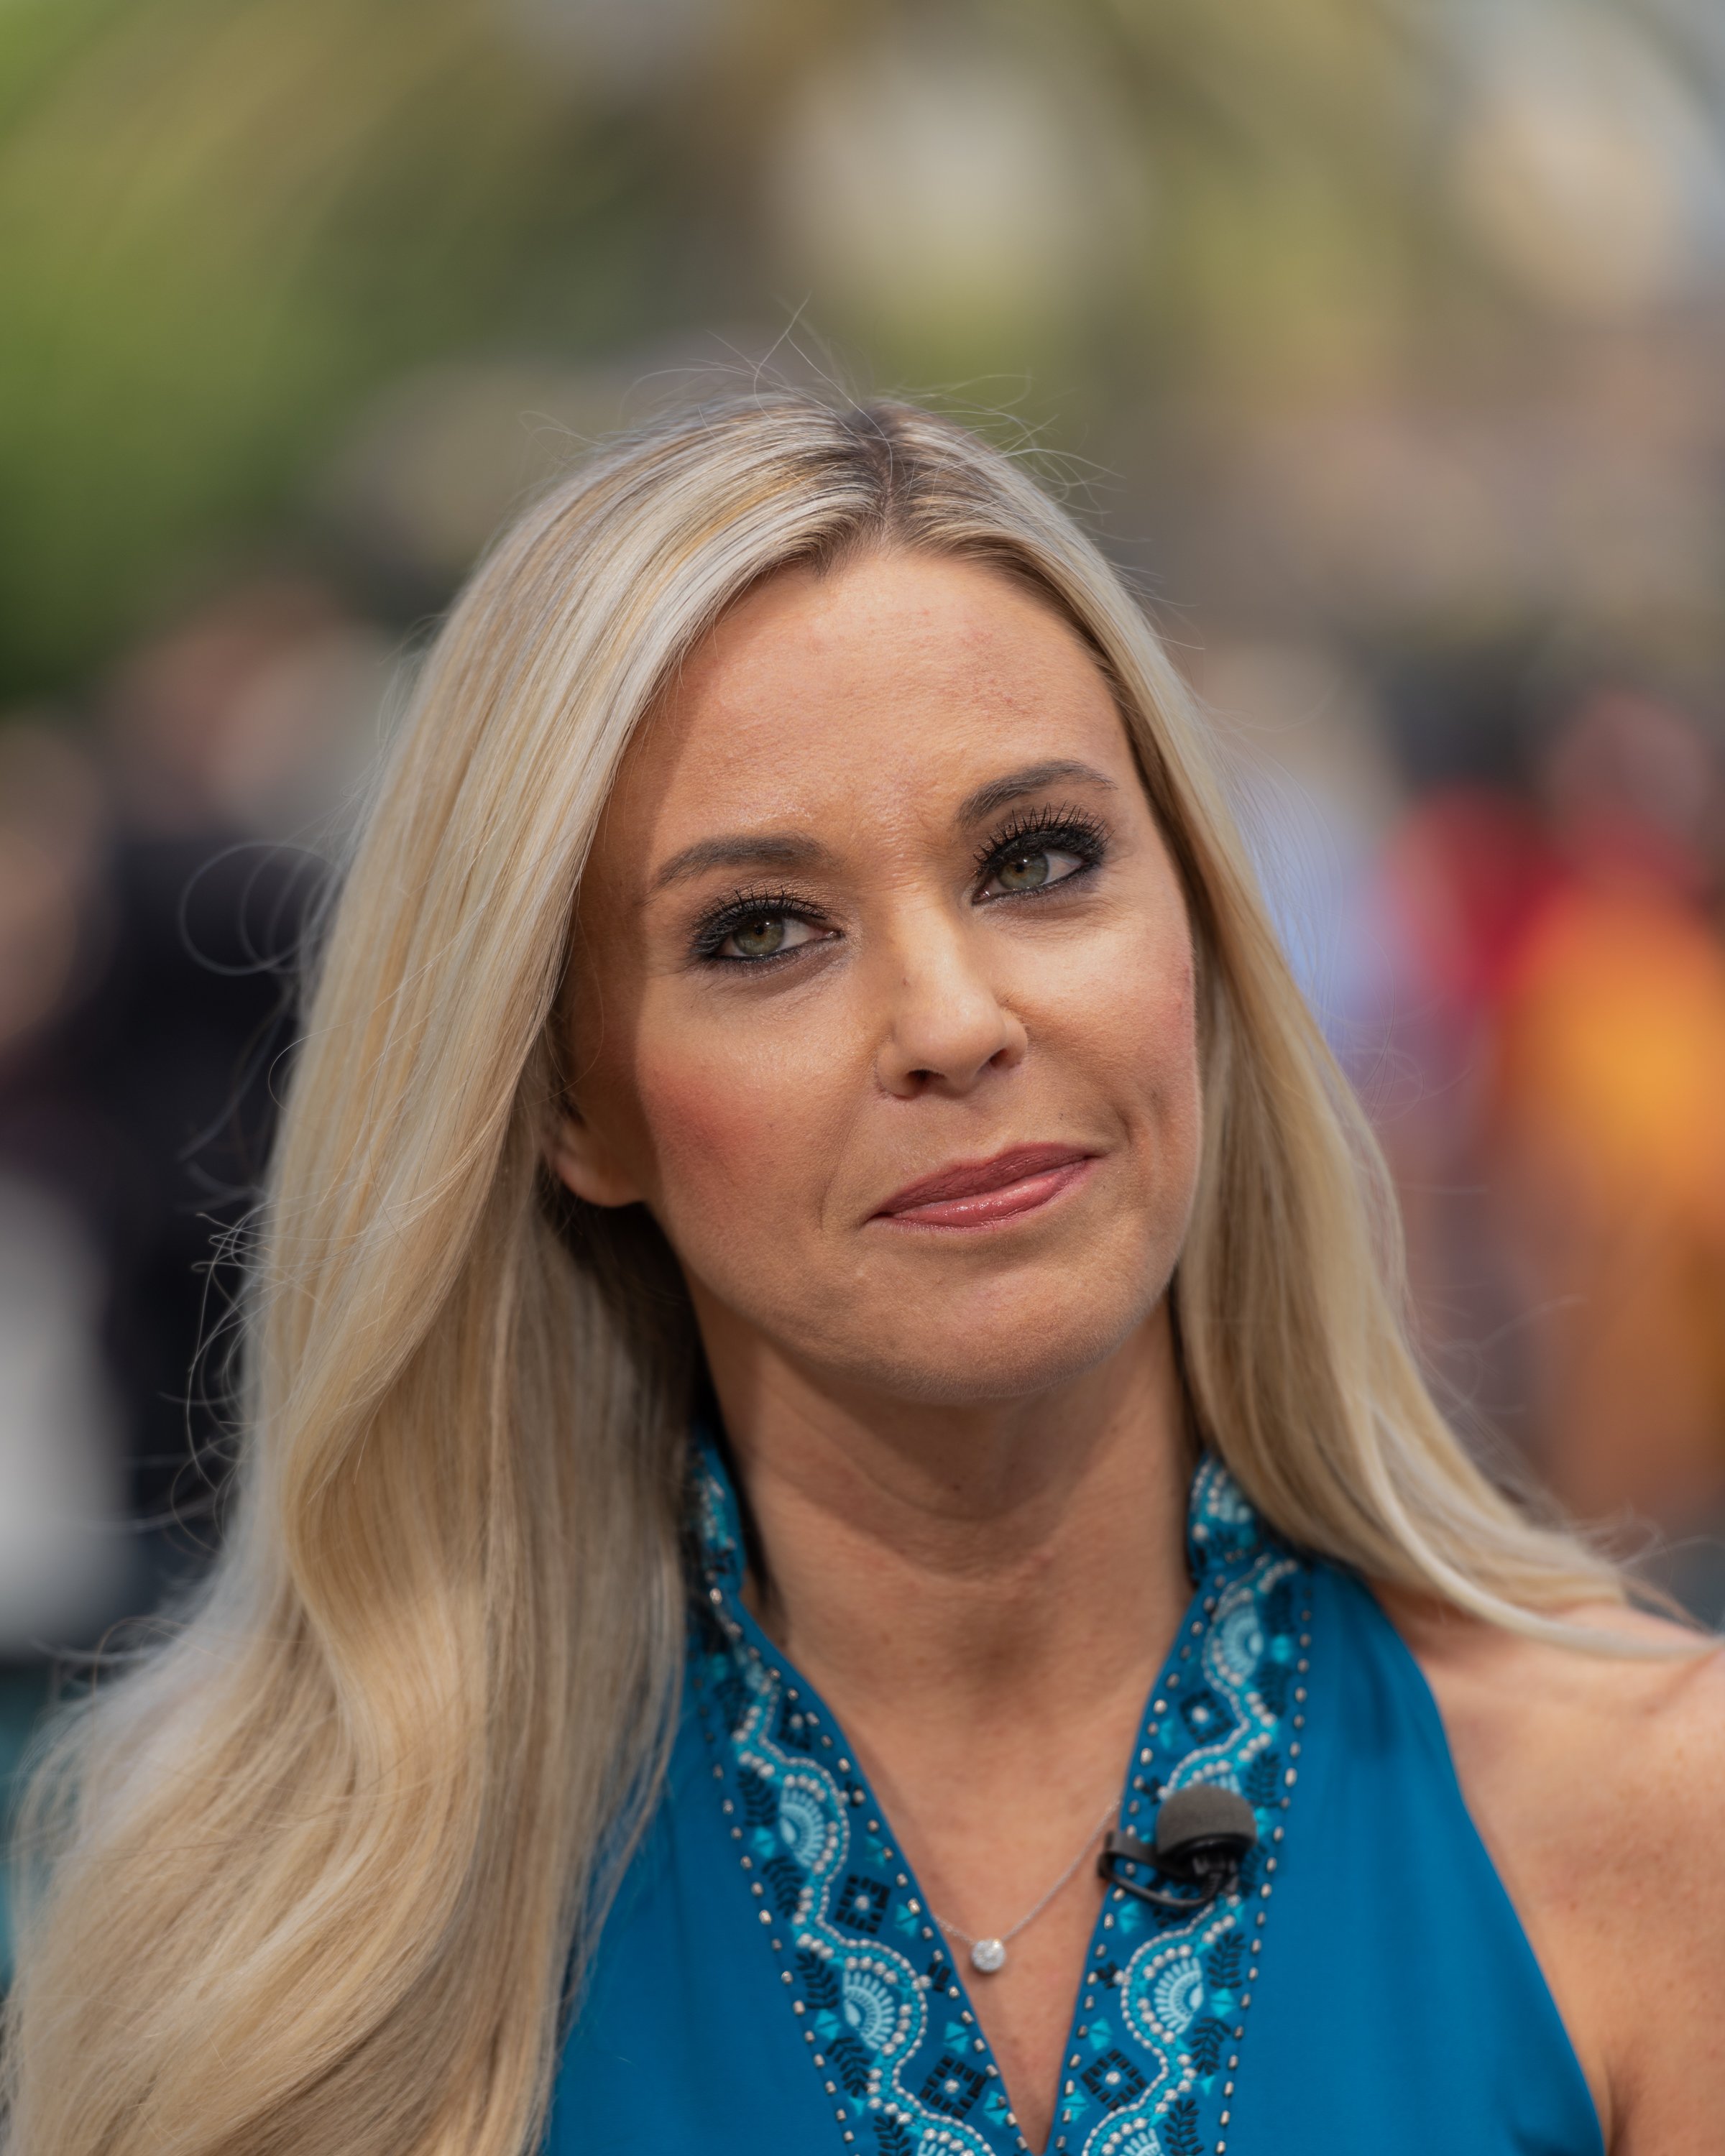 Kate Gosselin visits "Extra" at Universal Studios Hollywood on June 12, 2019 in Universal City, California | Source: Getty Images